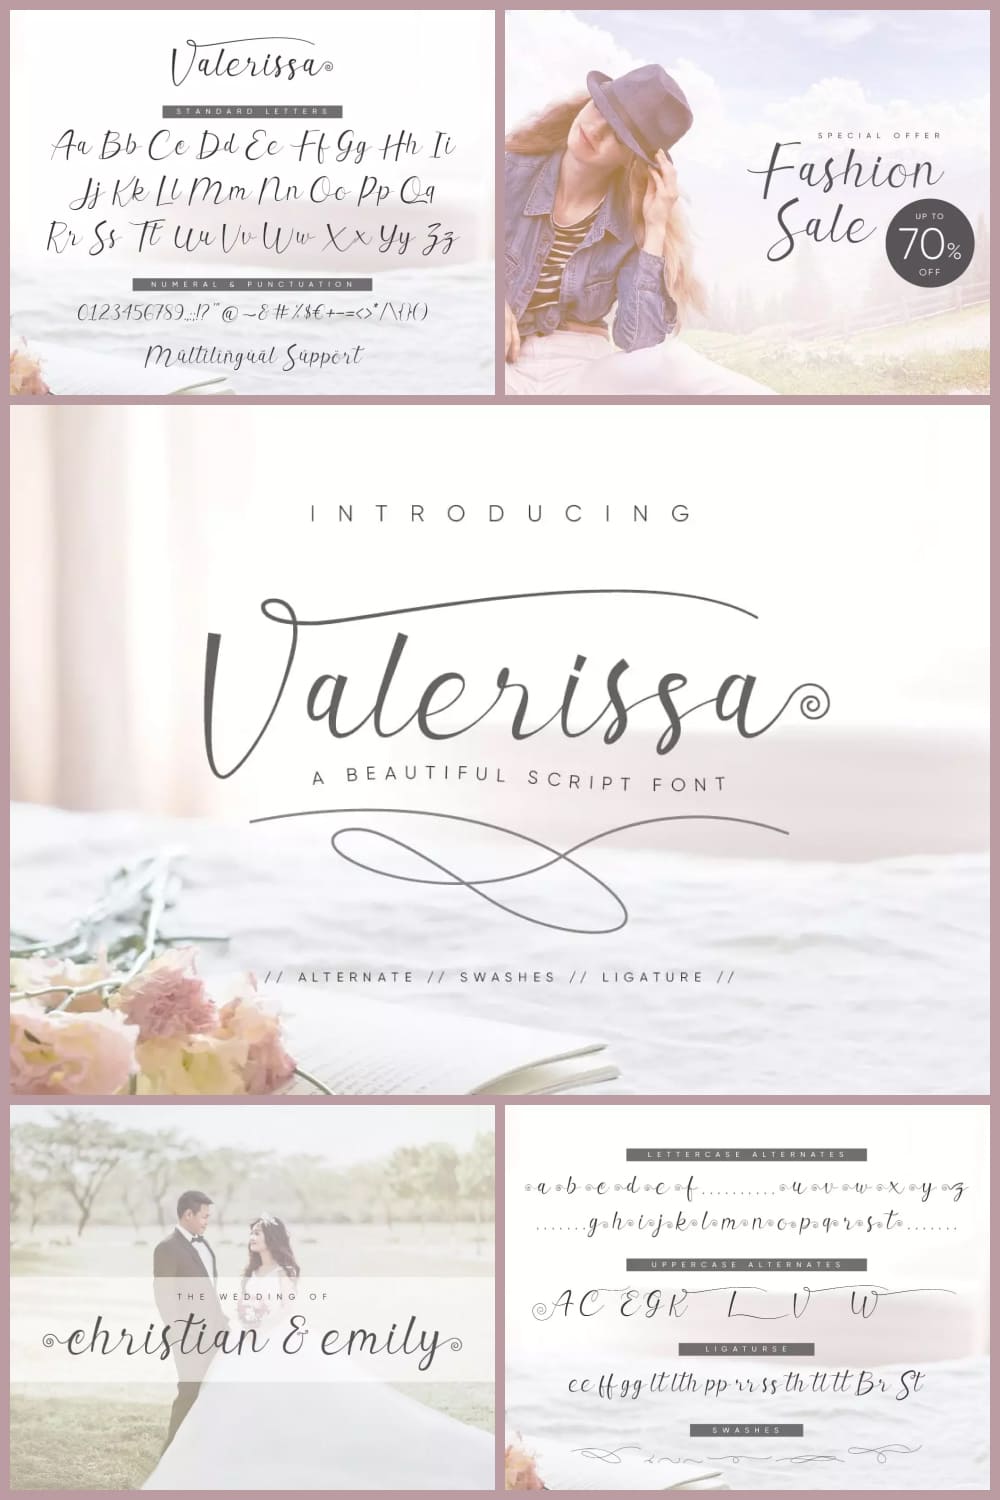 Gray text on the background of wedding photos.